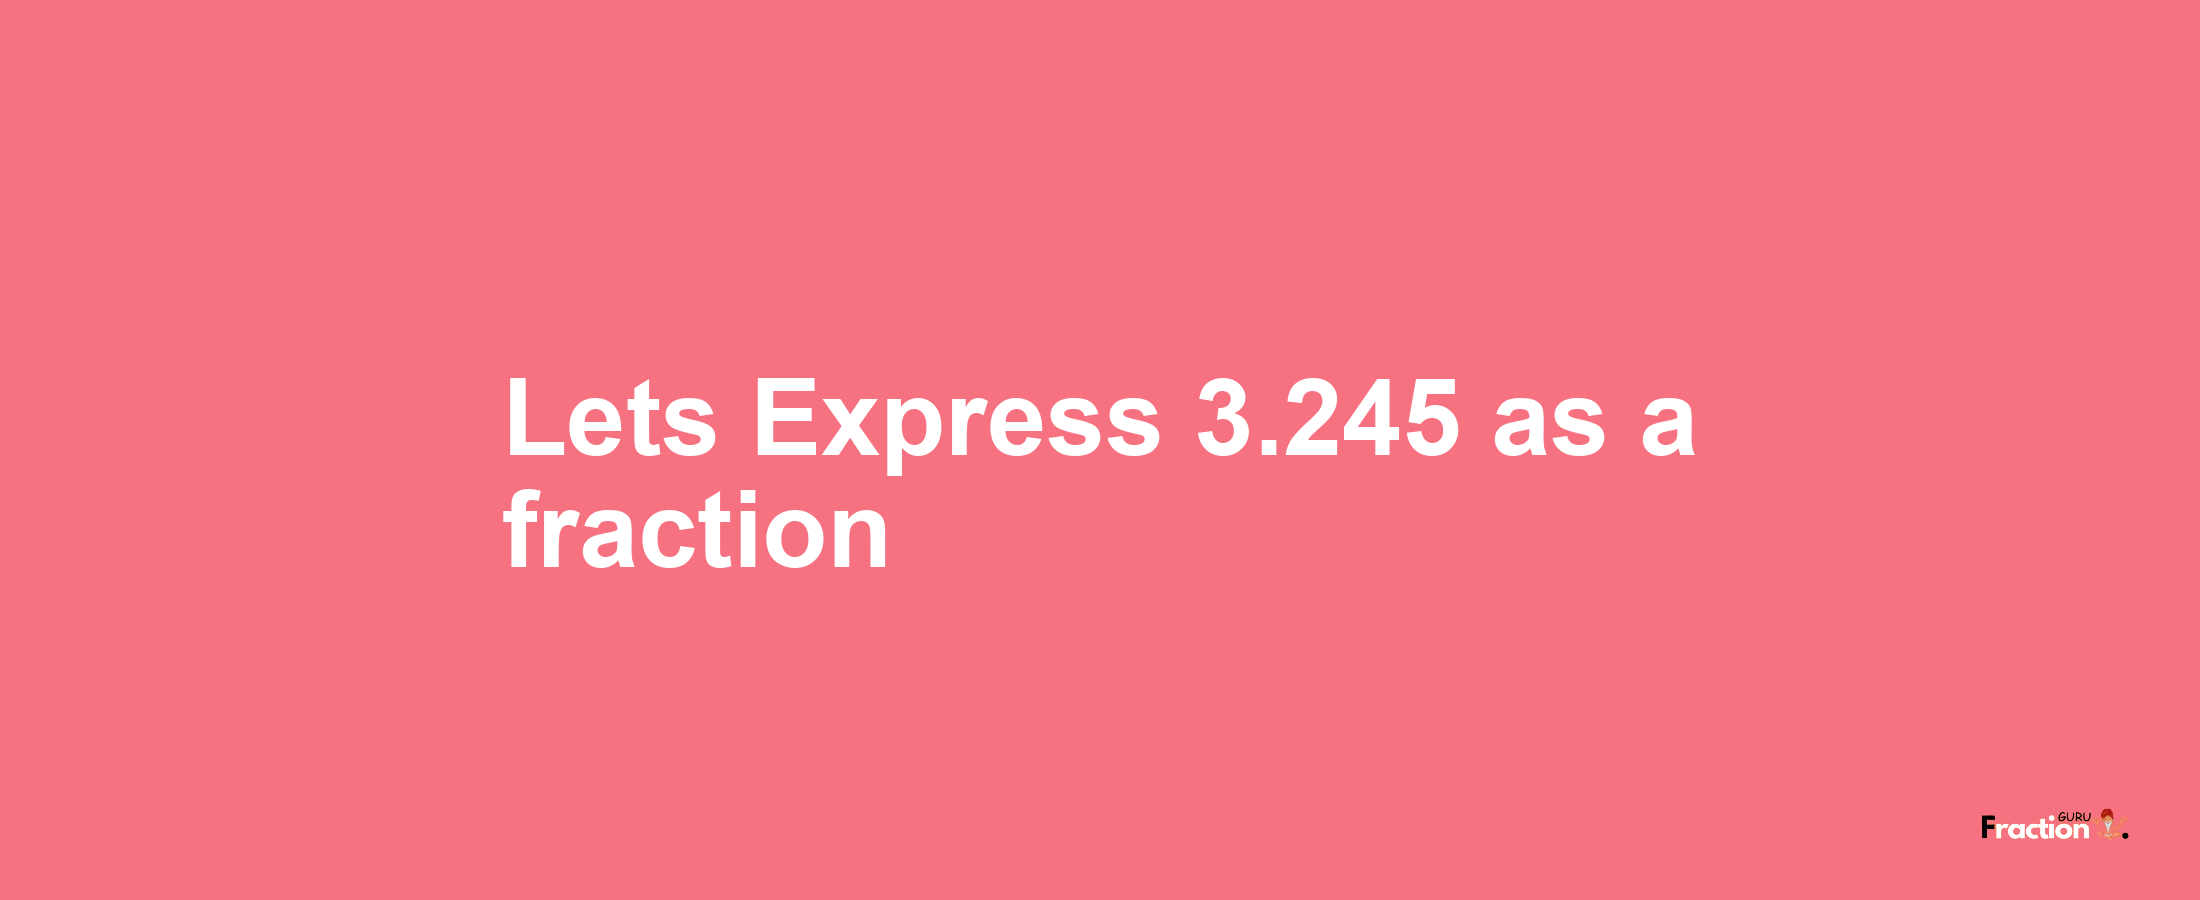 Lets Express 3.245 as afraction